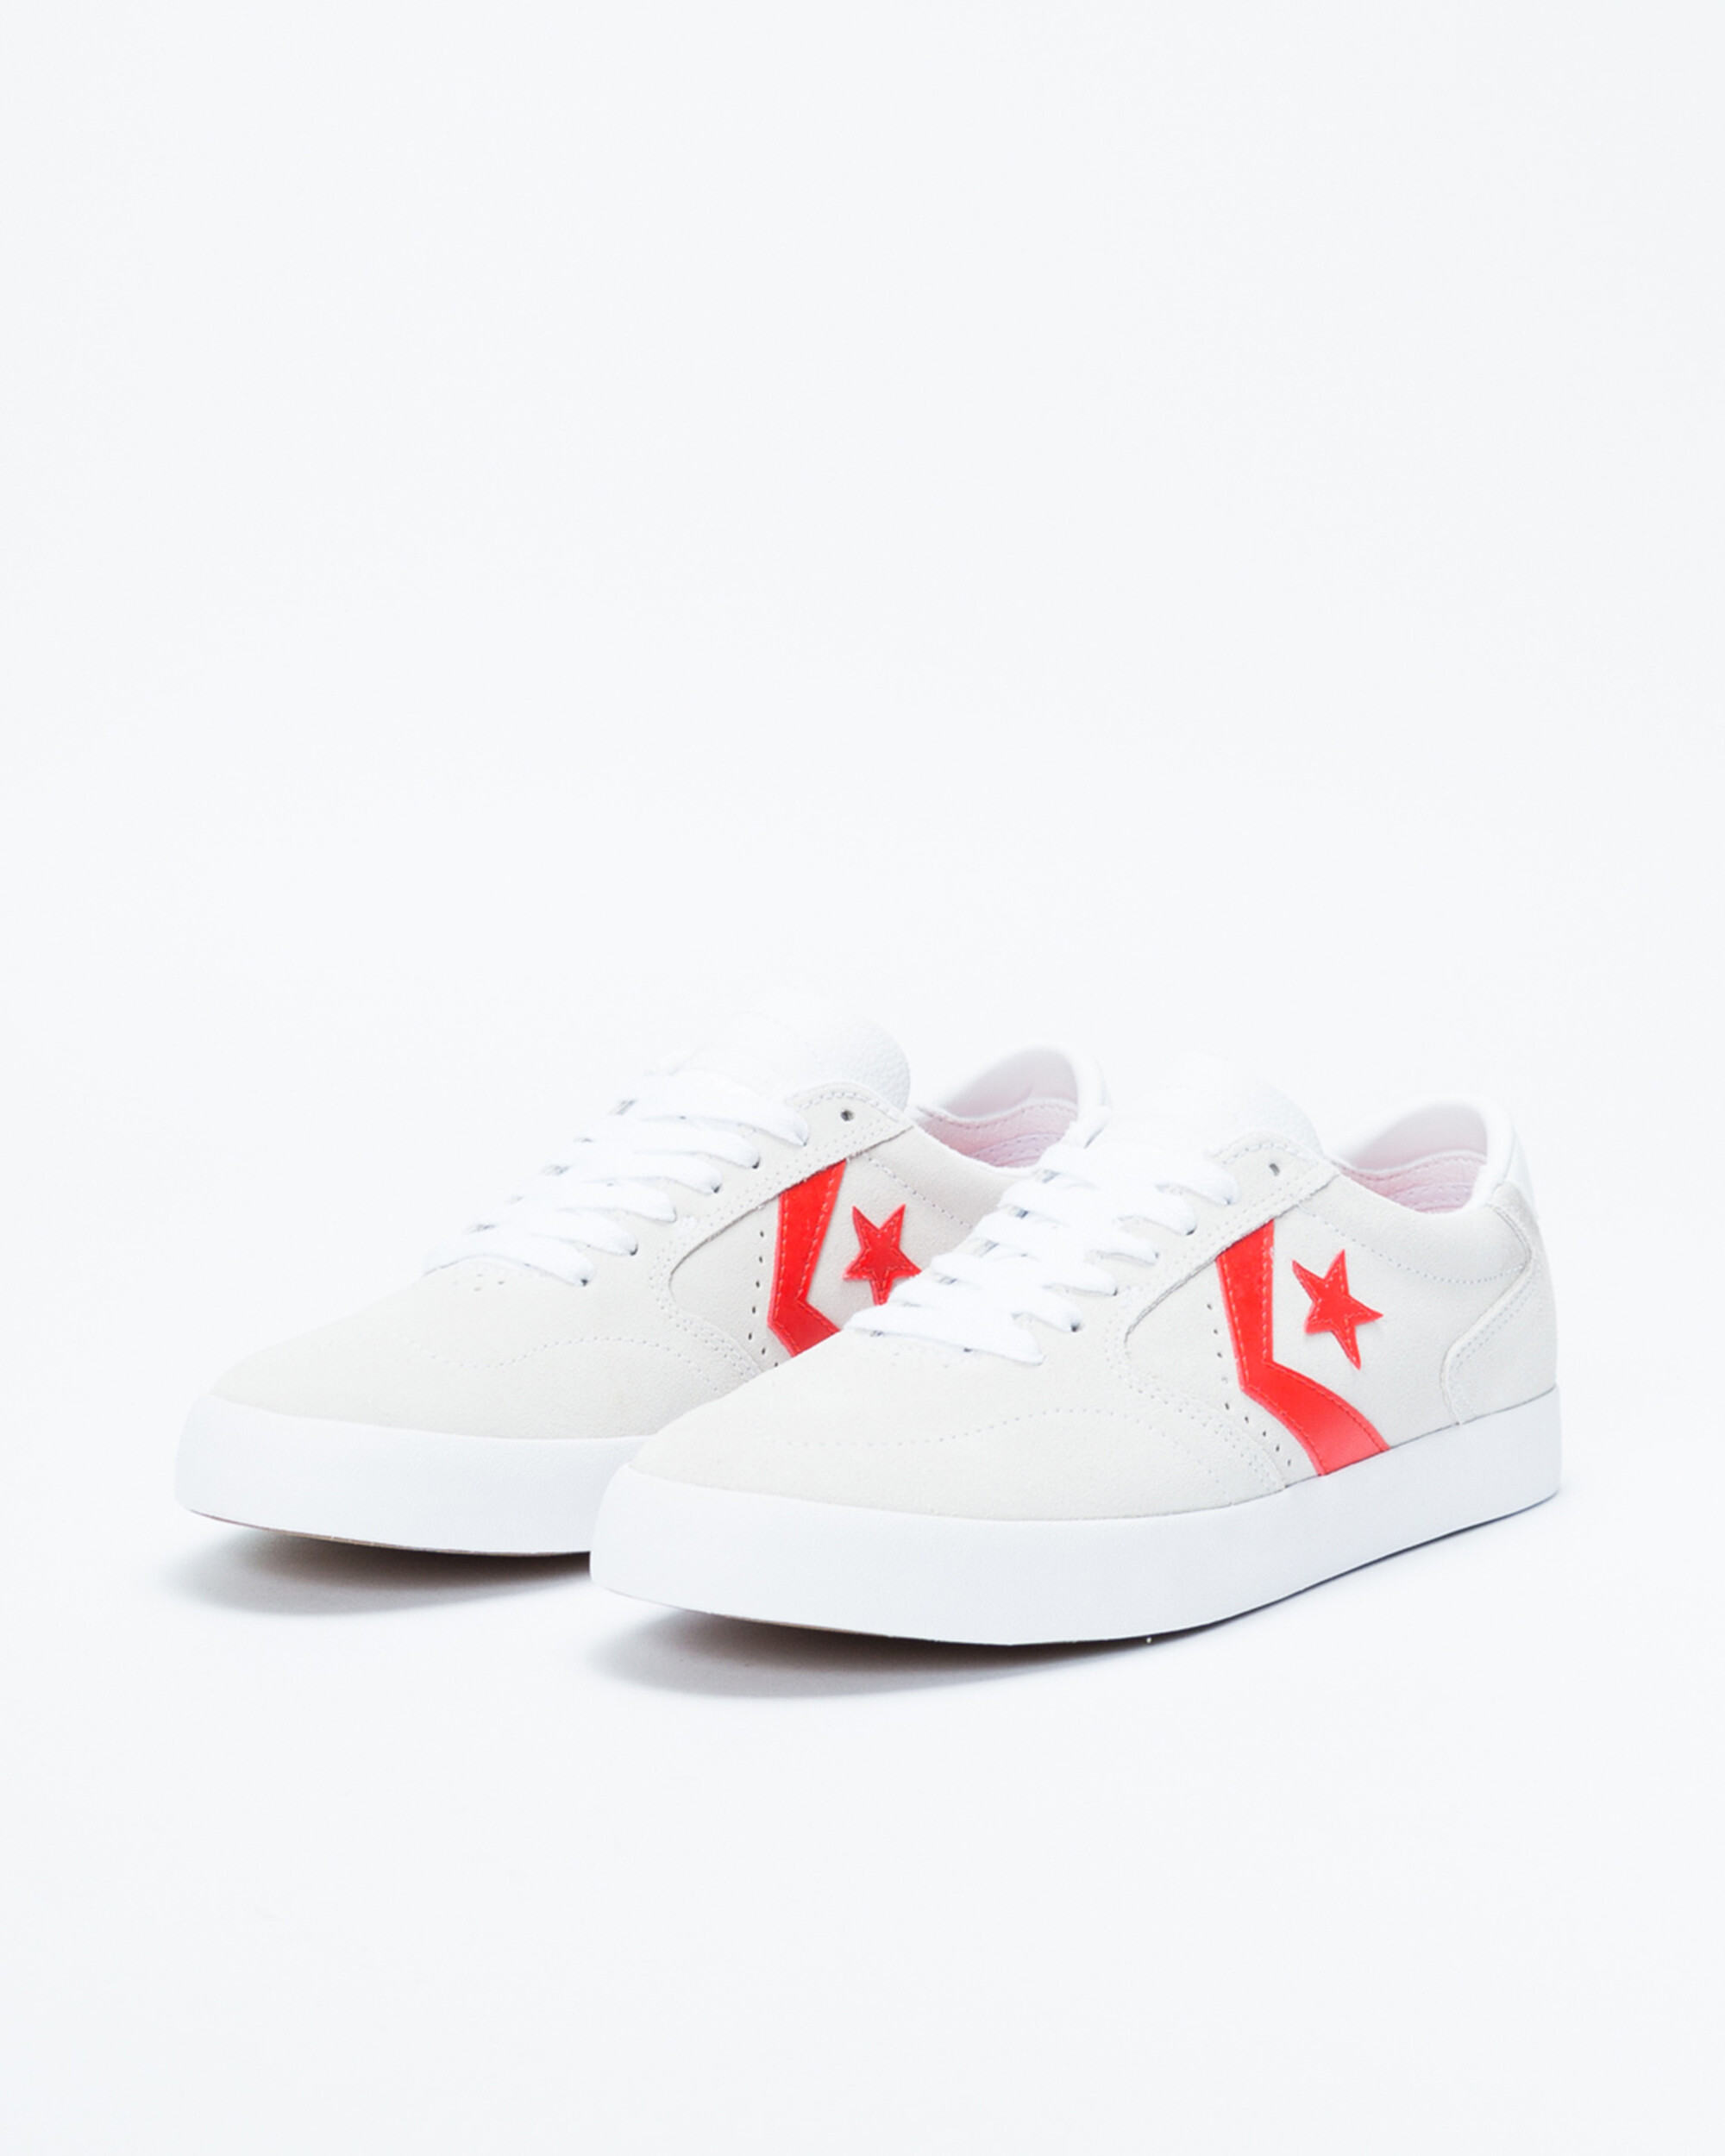 Converse Checkpoint Pro OX White/Habanero/Red